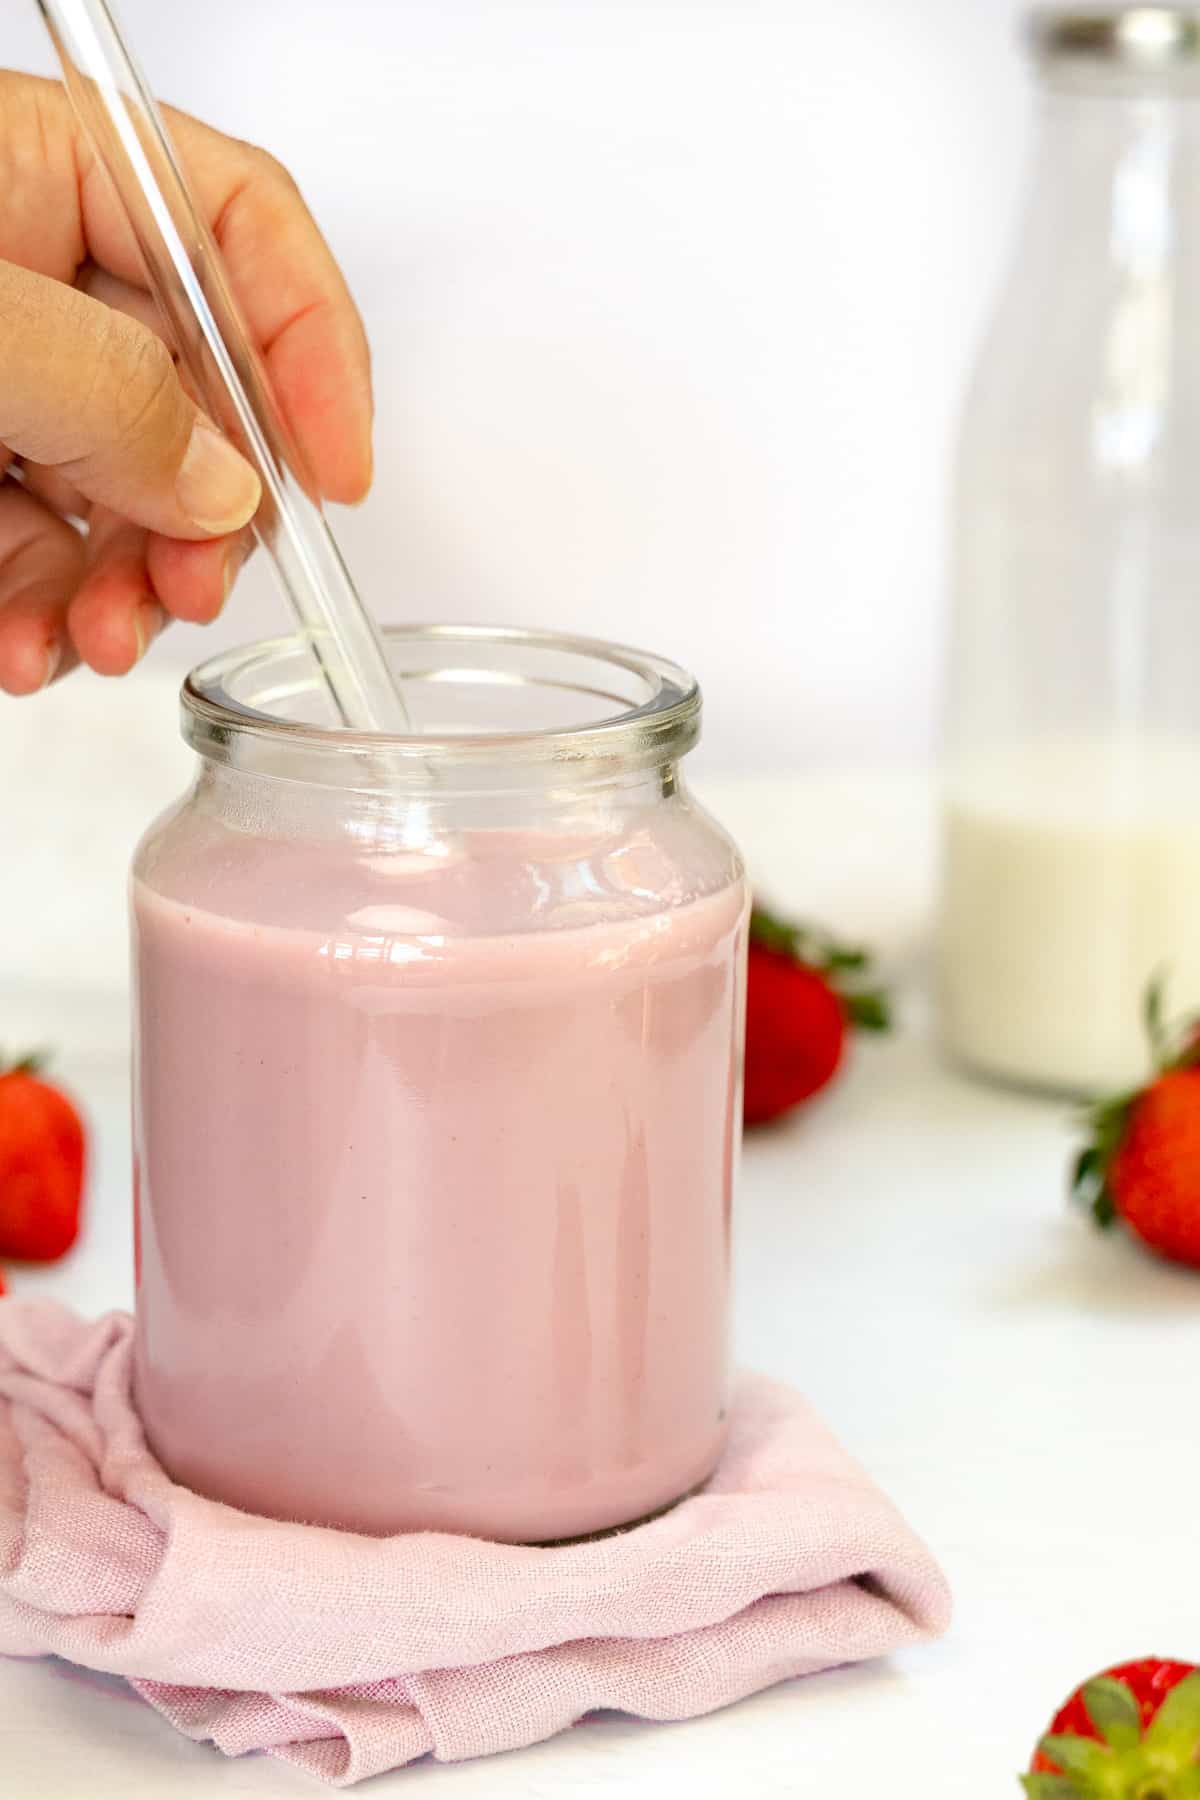 a hand holding a glass straw in a glass jar with pink milk in it